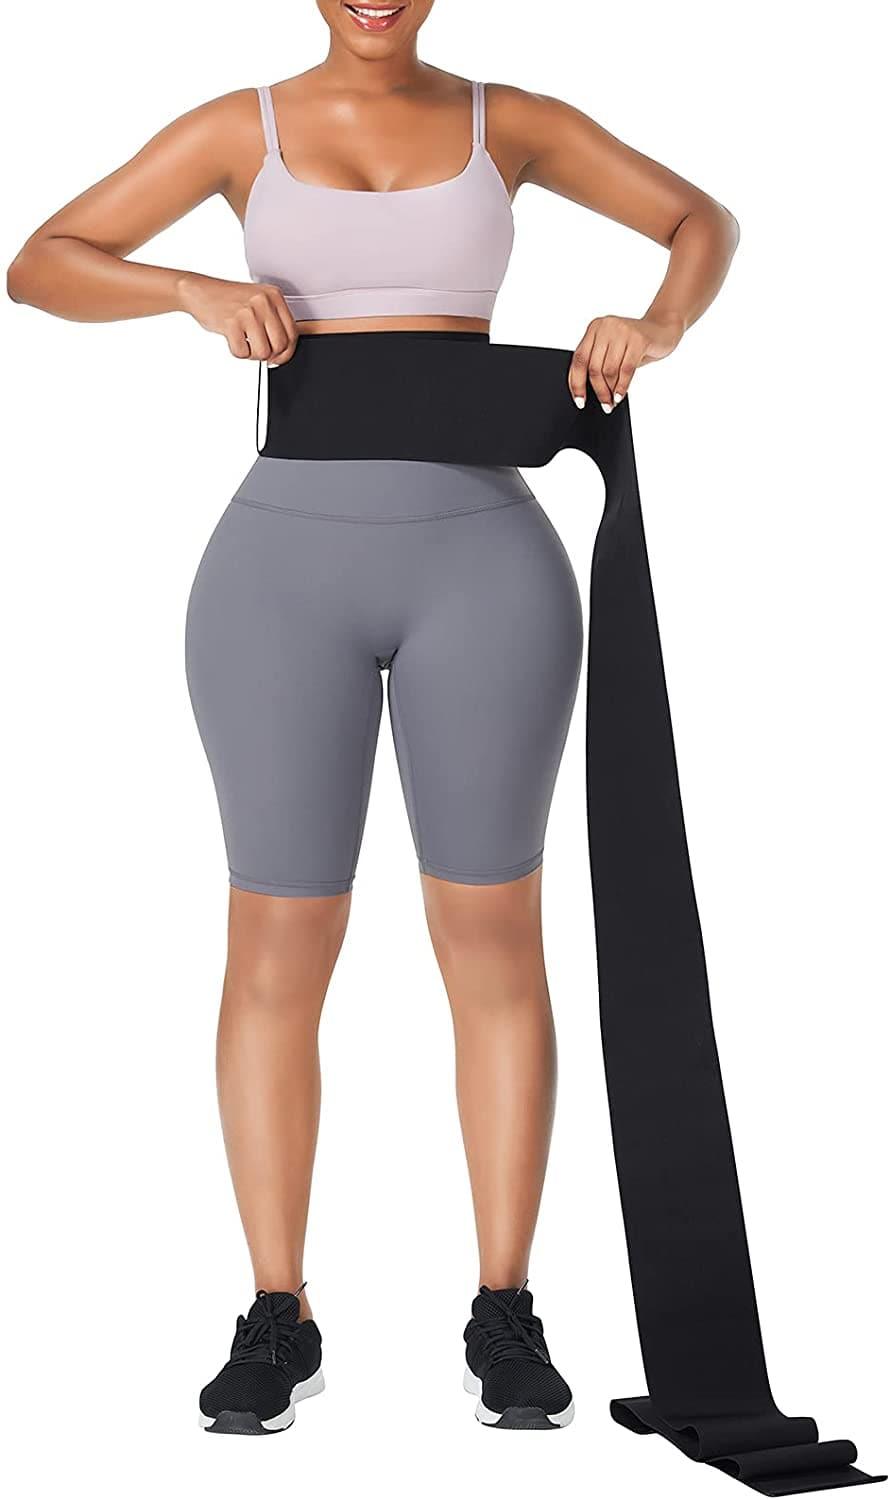 Waist Trainer for Women Snatch Bandage Tummy Sweat Wrap Plus Size Workout Waist Trimmer for Gym Sport - Ammpoure Wellbeing 🇬🇧